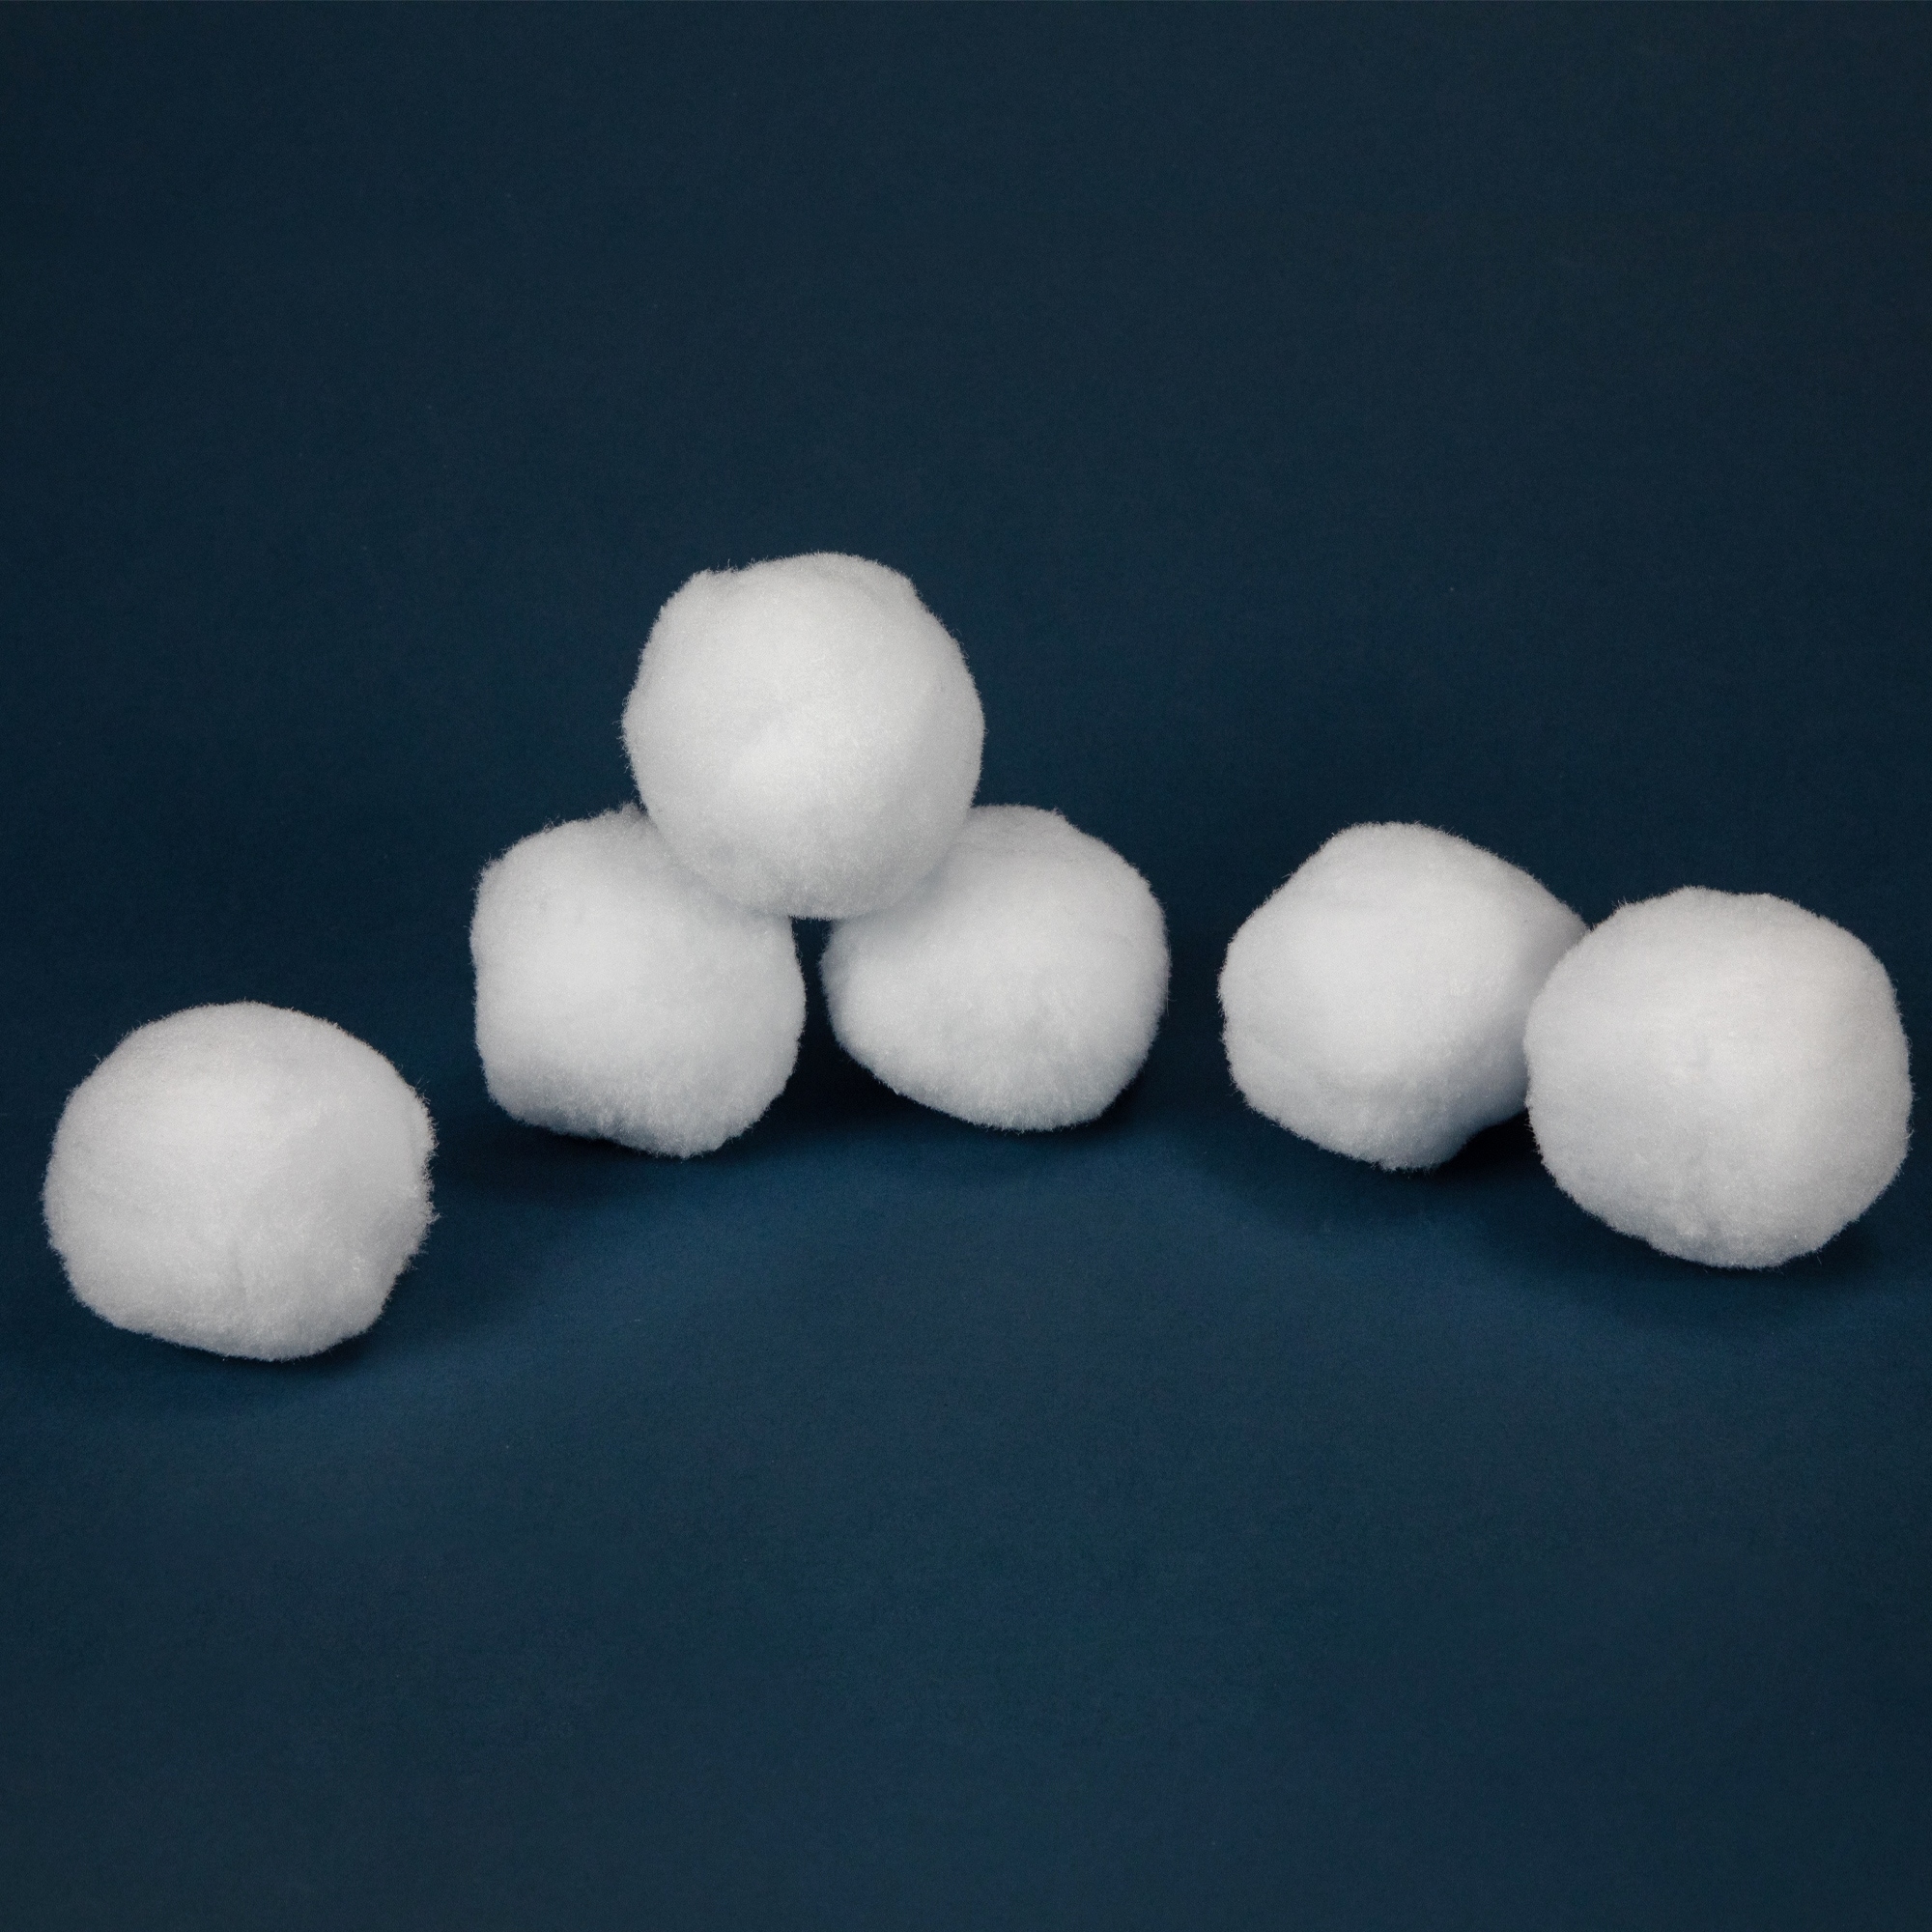 Fake Snowballs For Throwing  12 Indoor, Artificial Snowballs